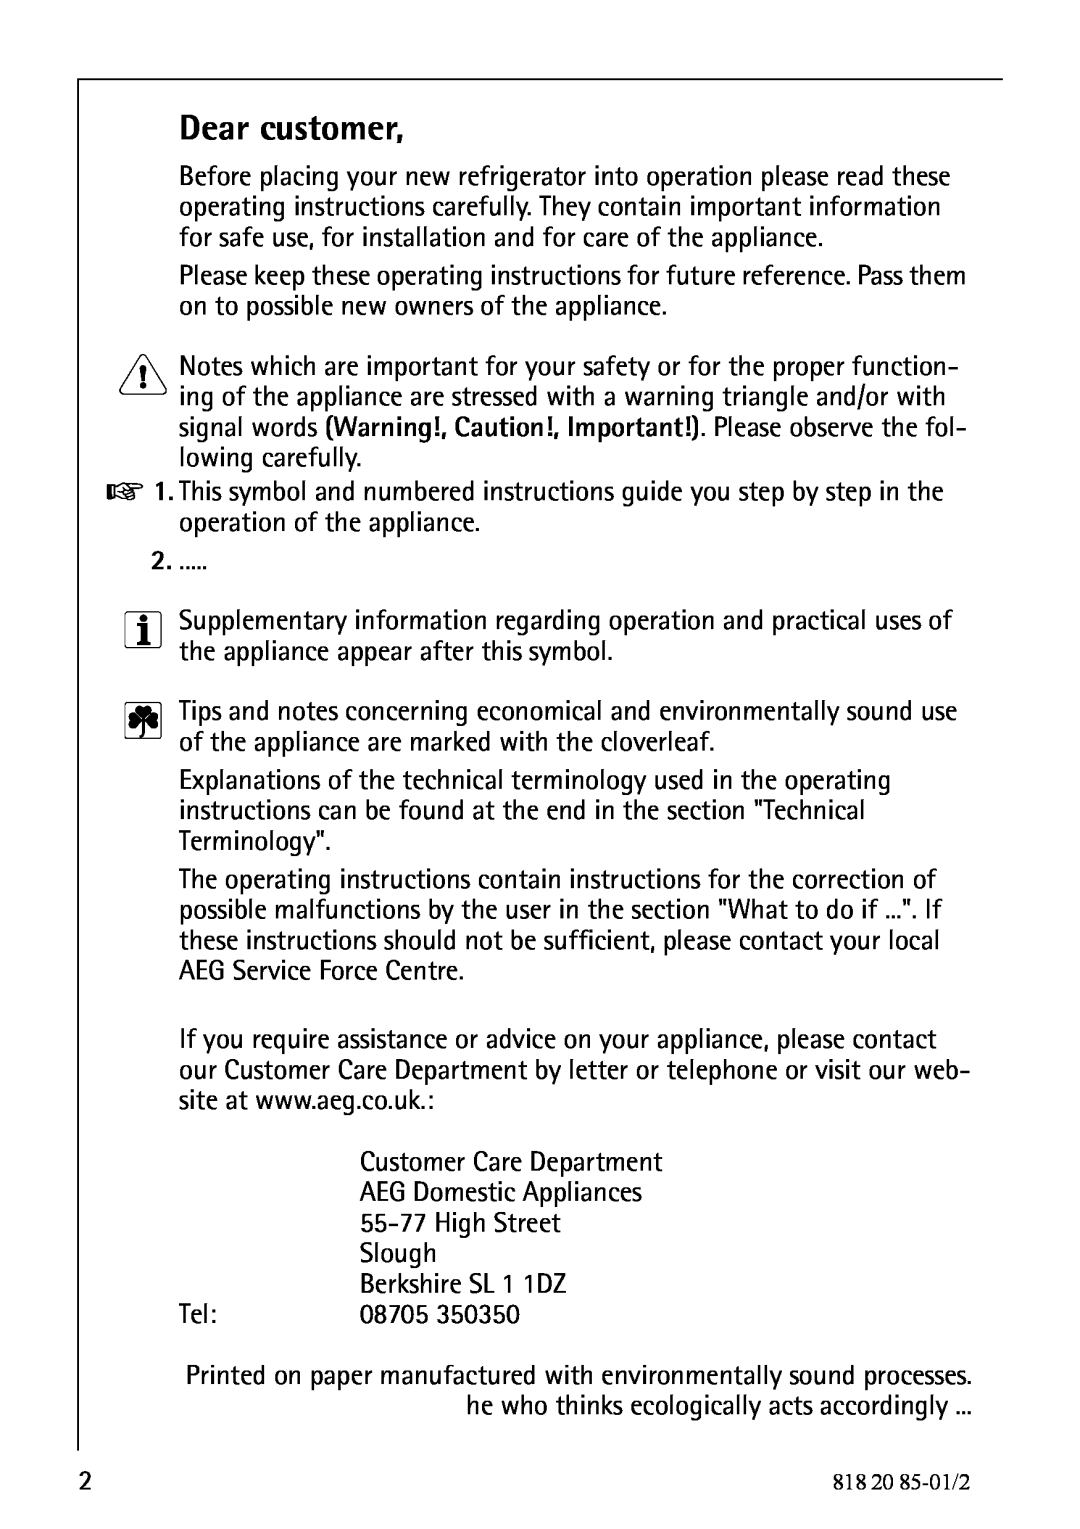 Electrolux 818 20 85 operating instructions Dear customer 